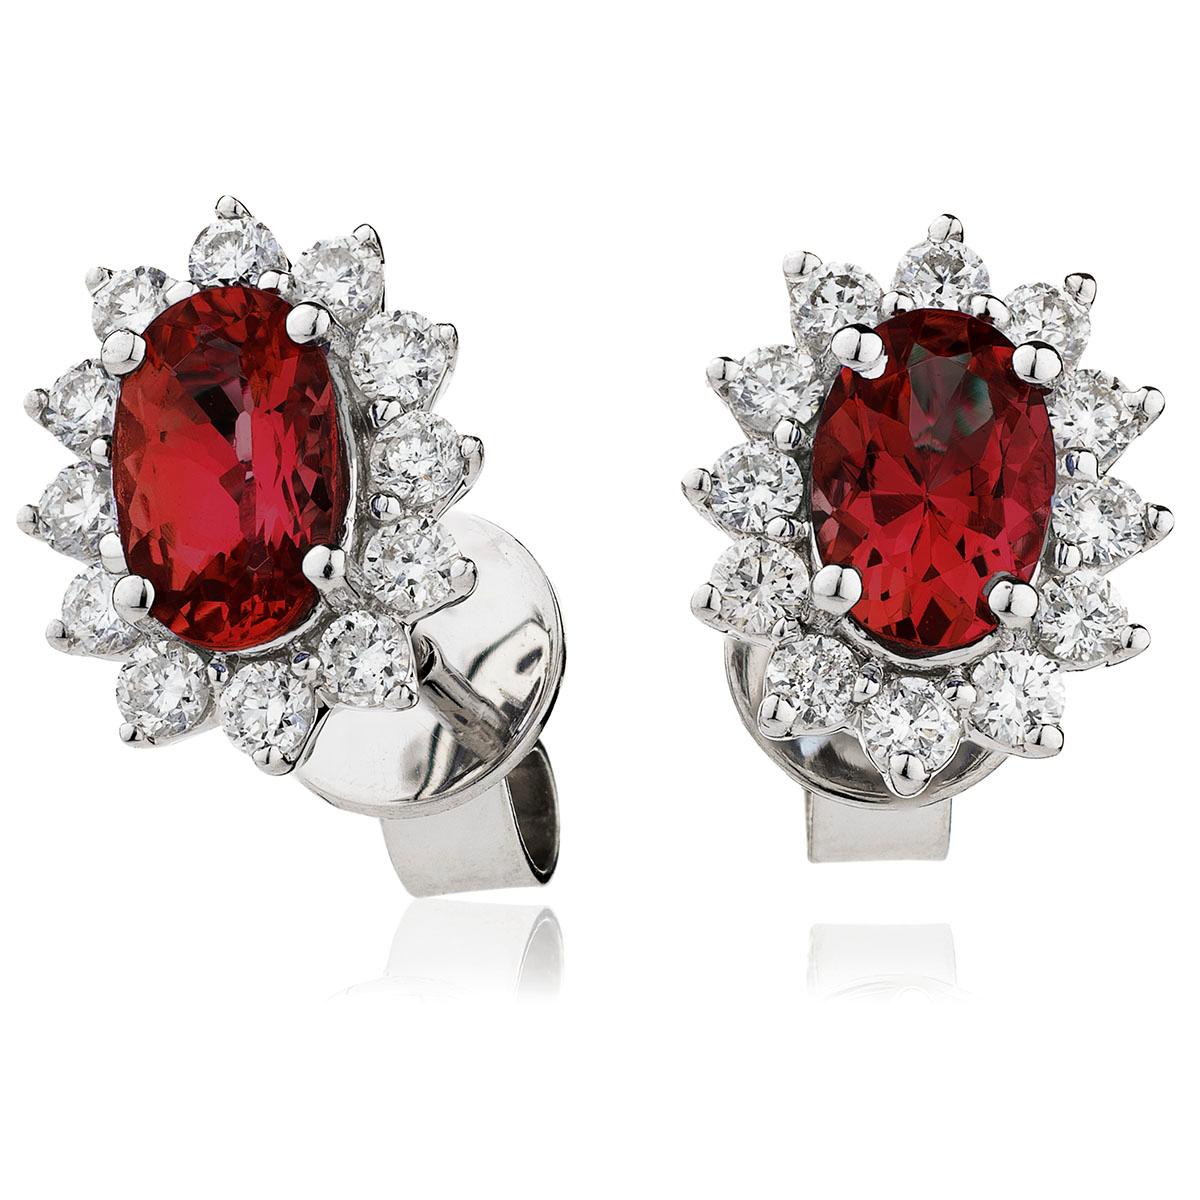 Graceful and striking 1.66 Carat total ruby and diamond Cluster earrings, The brilliant oval ruby in the middle of each earring is tastefully encircled by 12 white stunning diamonds, 24 precious diamonds for both, weighing a total of 0.40 carat